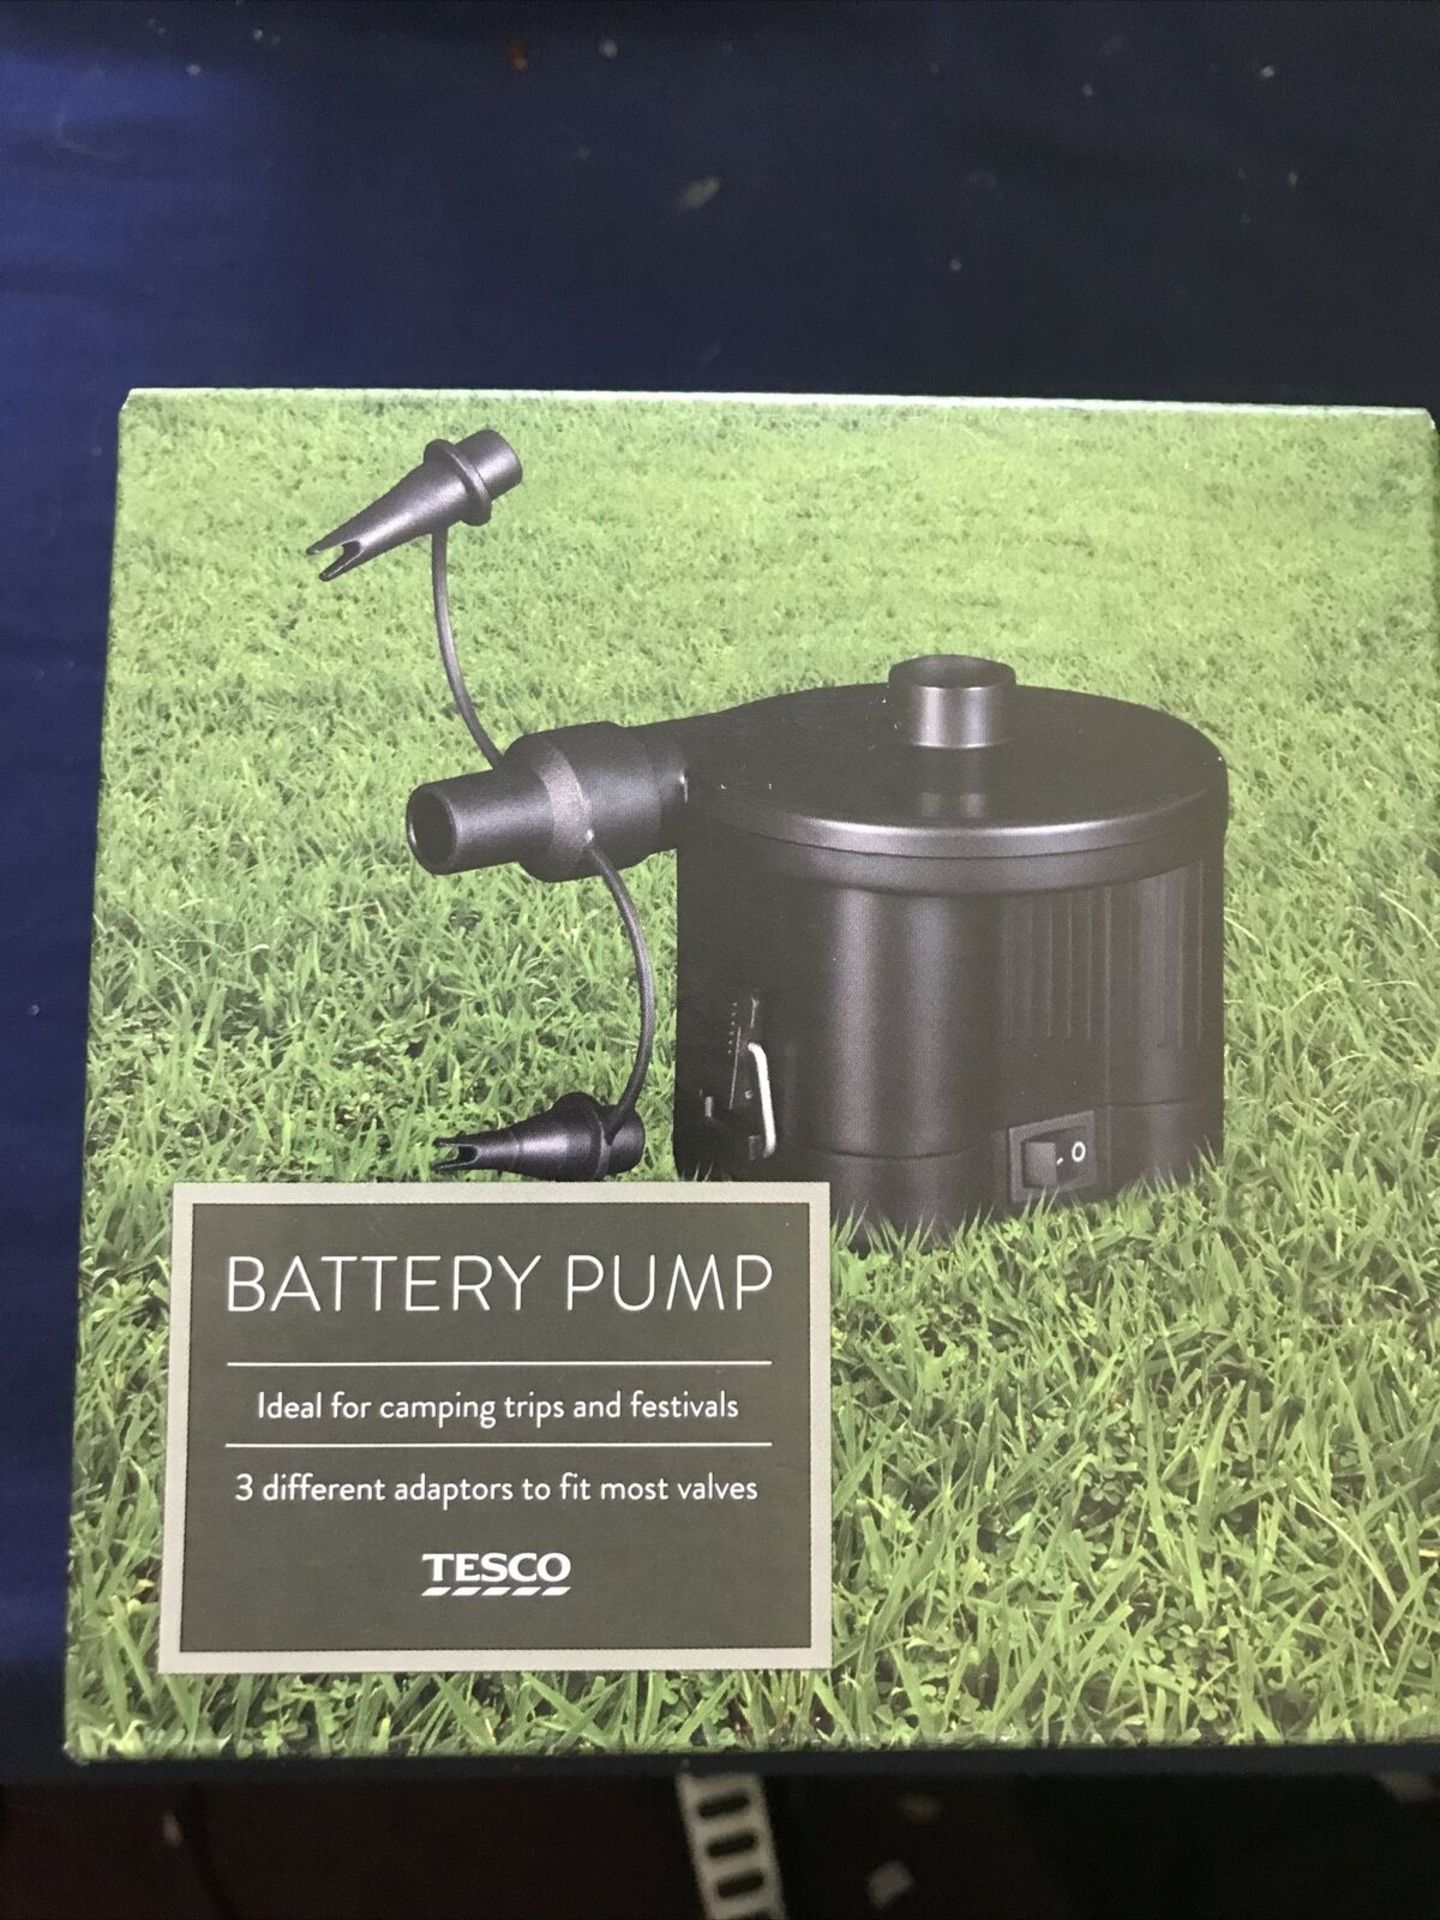 12 X NEW BOXED TESCO BATTERY PUMPS. IDEAL FOR CAMPING, TRIPS AND FESTIVALS. 3 DIFFERENT ADAPTORS